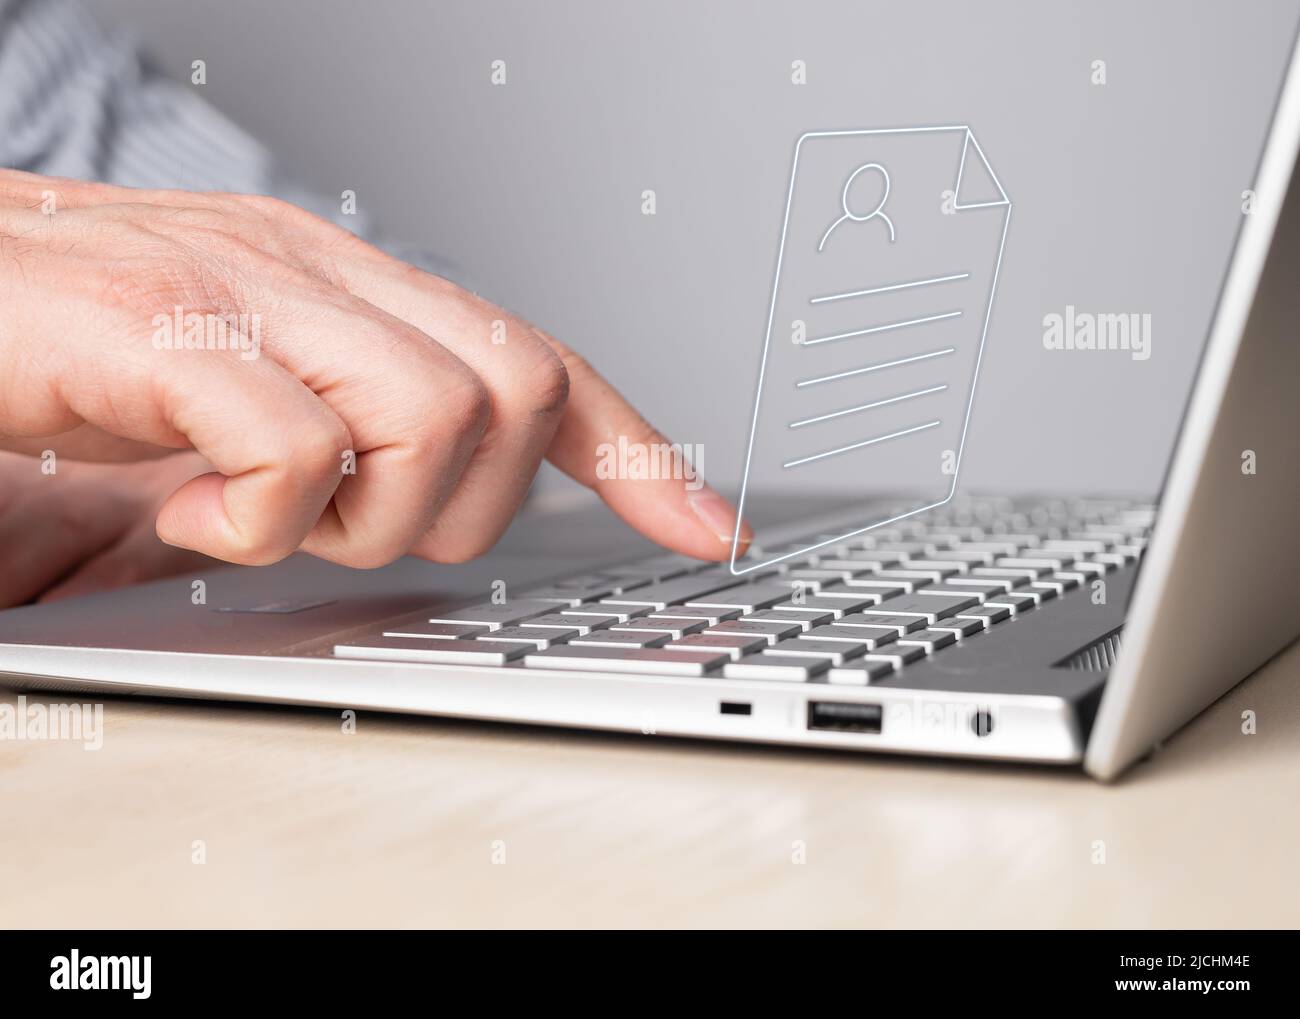 CV, application submission. Man working on laptop and sending curriculum vitae. Male forefinger pressing enter button. Resume uploading concept. High quality photo Stock Photo